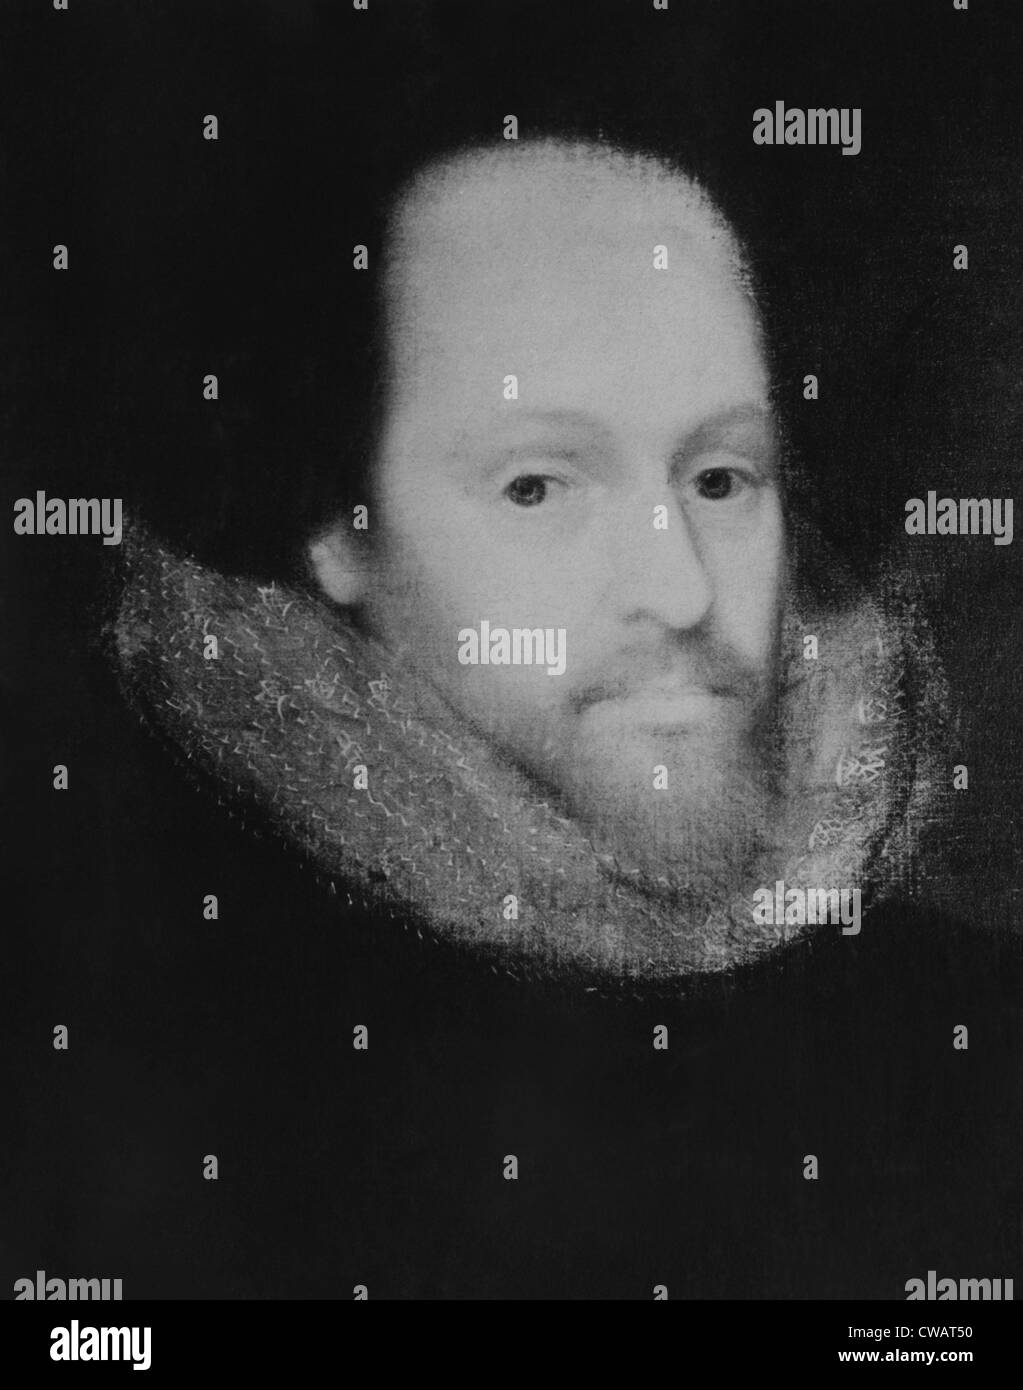 William Shakespeare (1564-1616), English poet and playwright. Courtesy: CSU Archives/Everett Collection Stock Photo